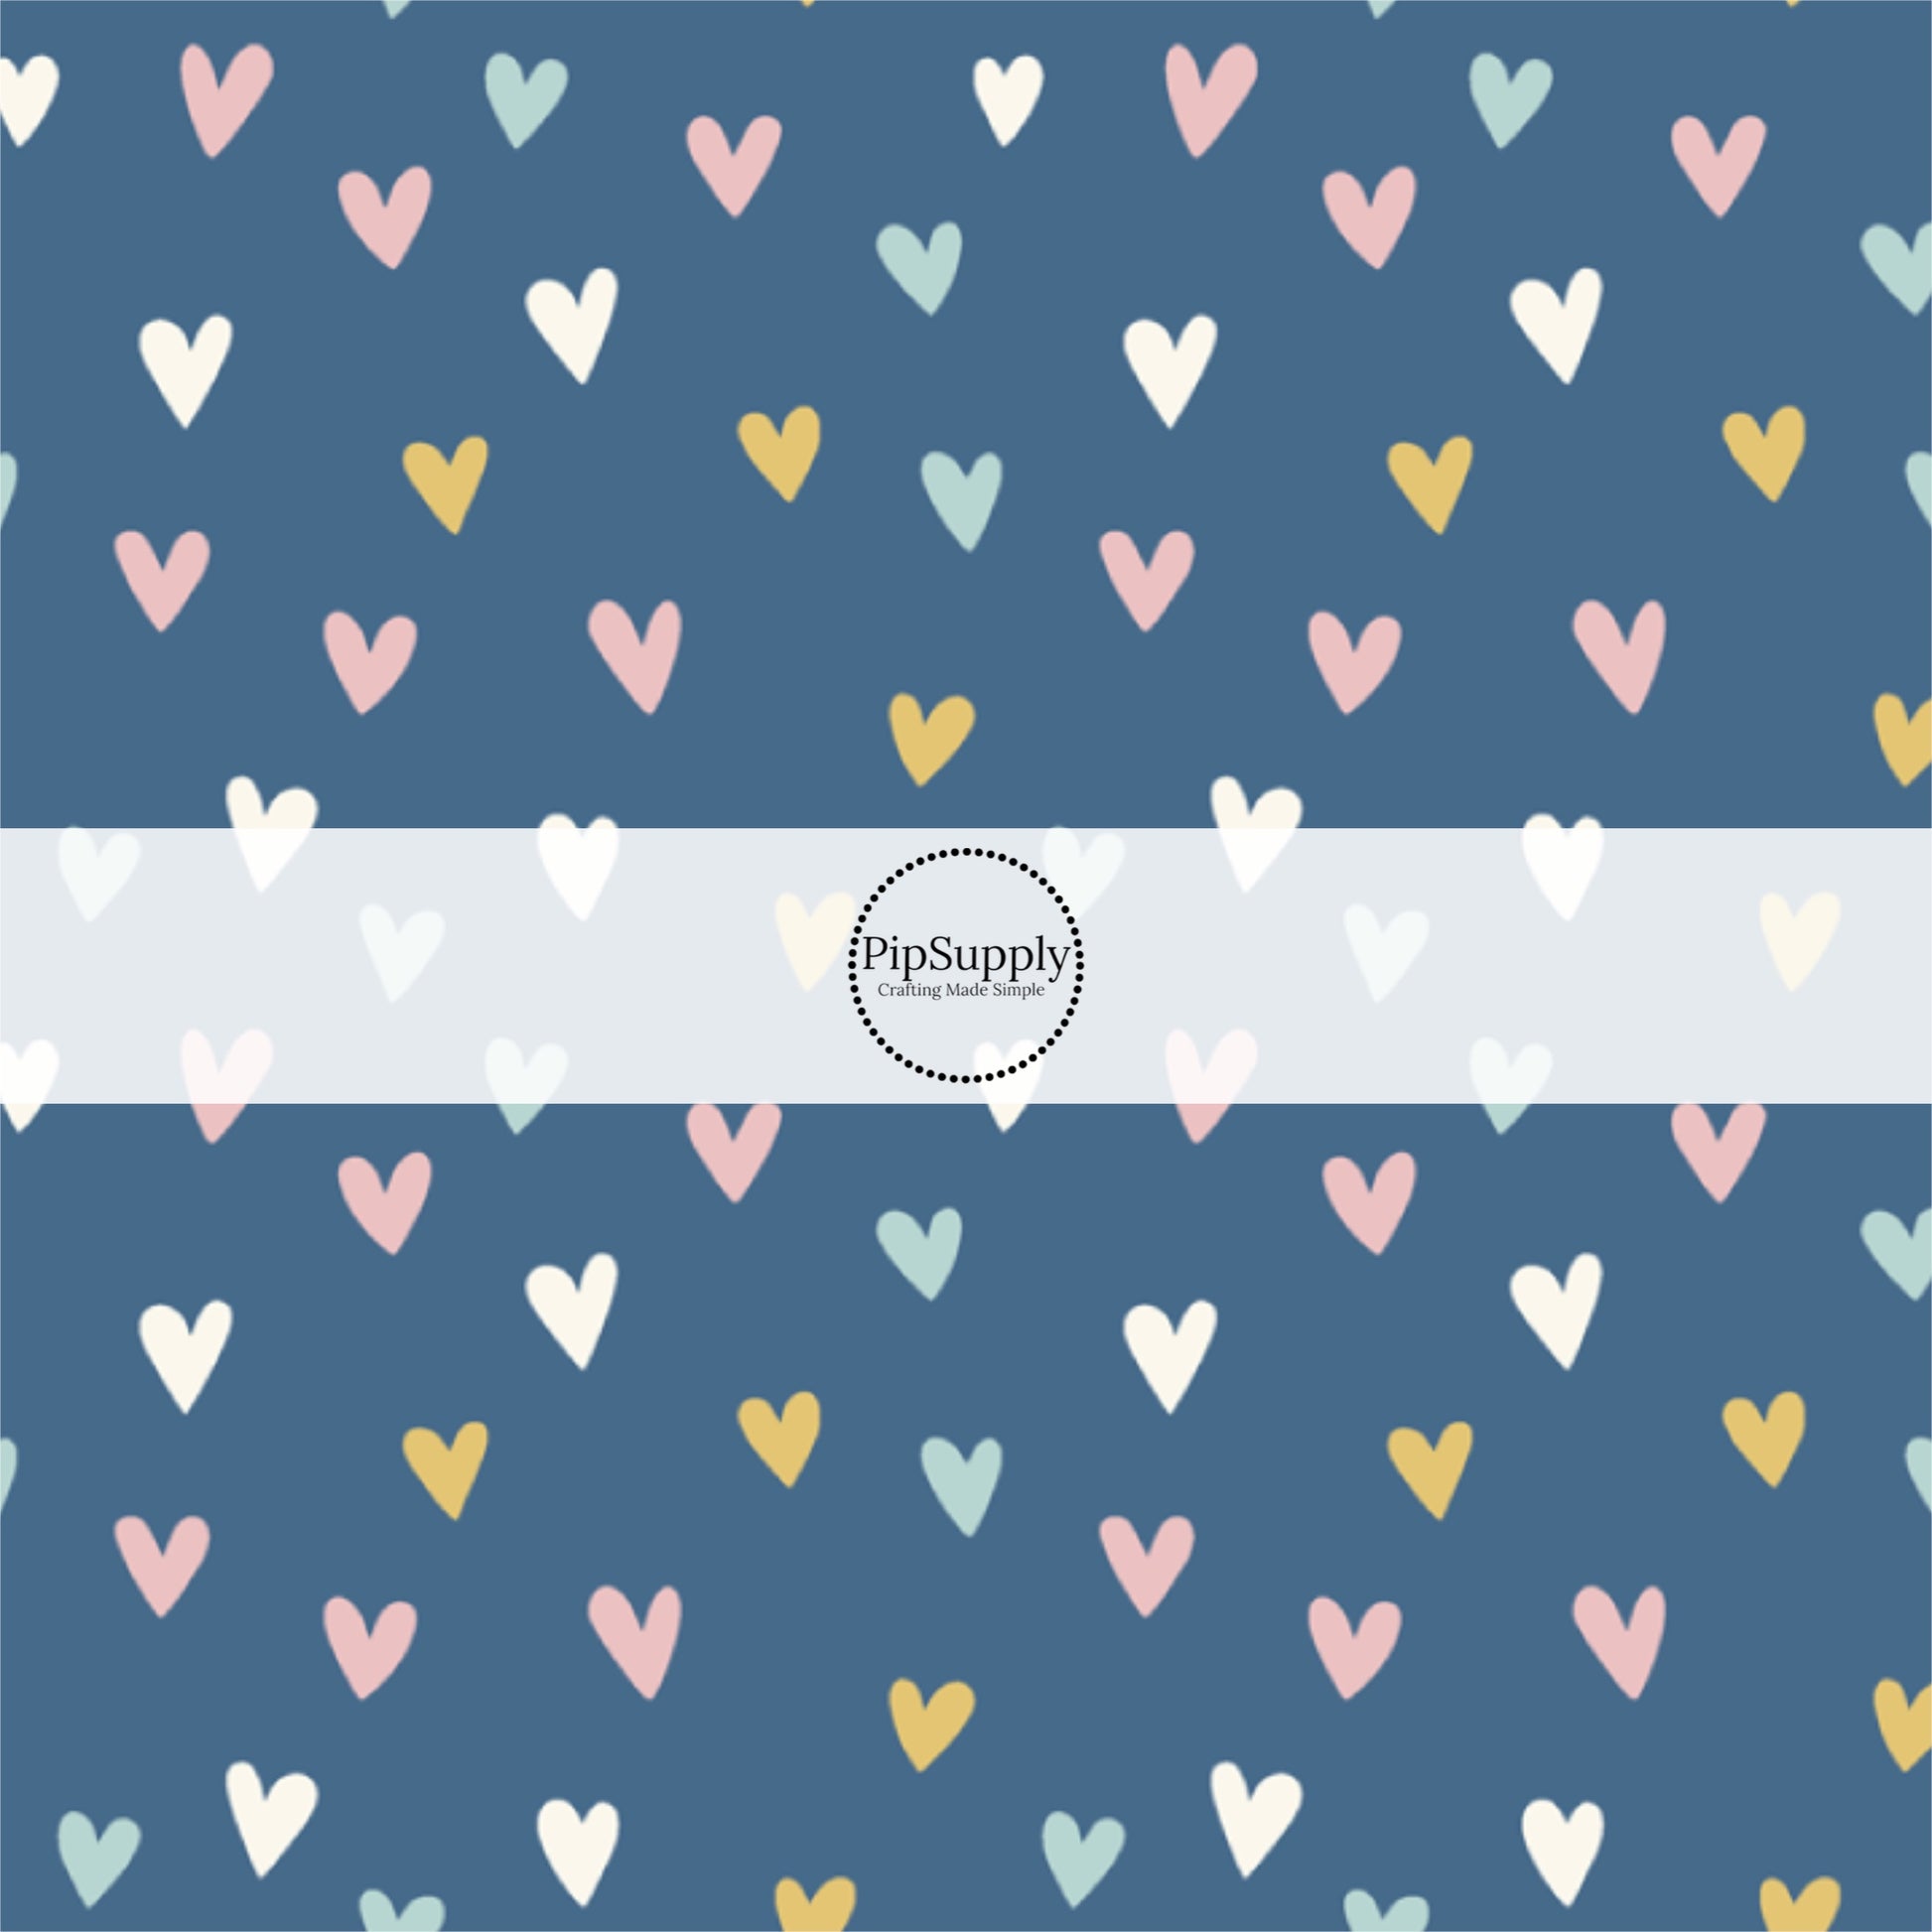 These spring patterned headband kits are easy to assemble and come with everything you need to make your own knotted headband. These kits include a custom printed and sewn fabric strip and a coordinating velvet headband. This cute pattern features light pink, light blue, yellow, and cream hearts on dark blue. 